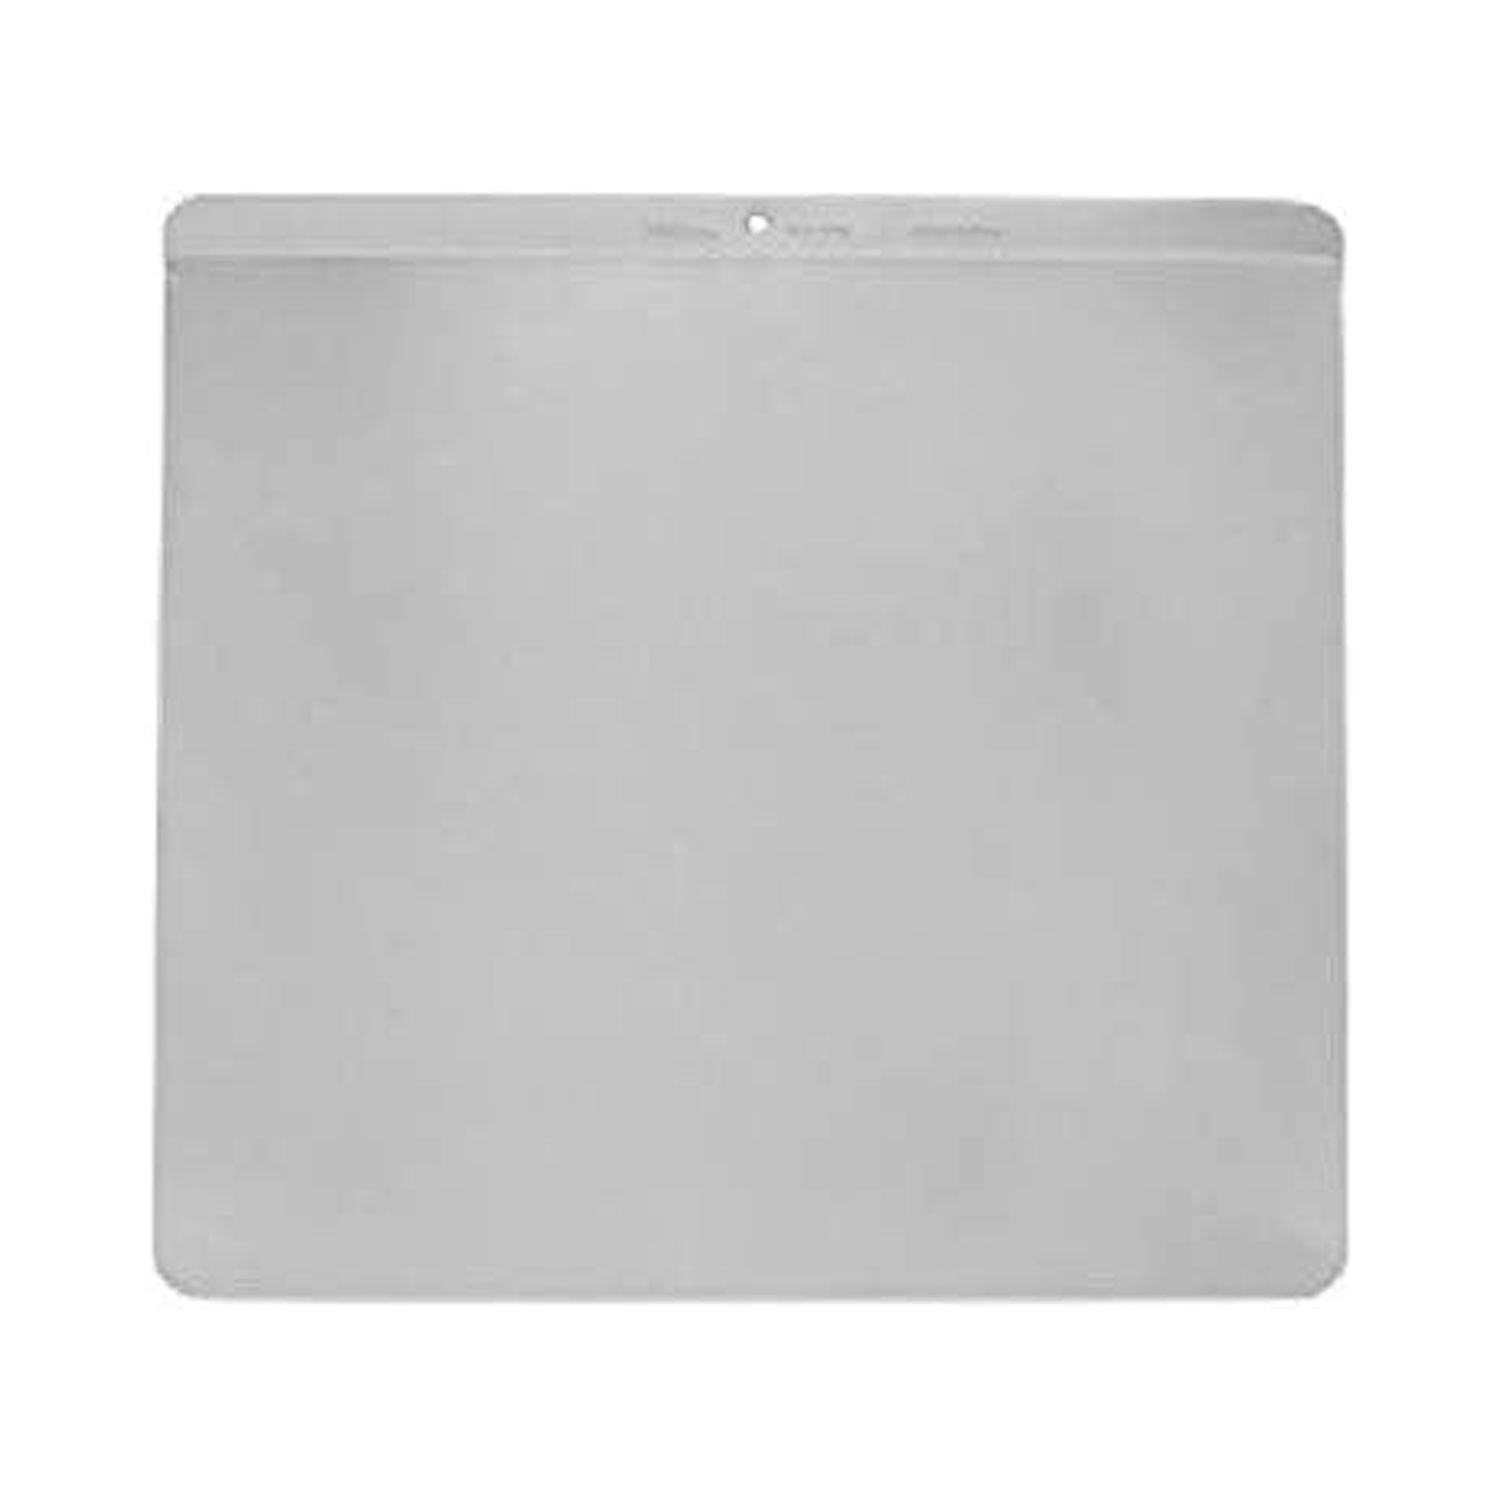 Insulated Cookie Sheet 16 x 14 By Wilton